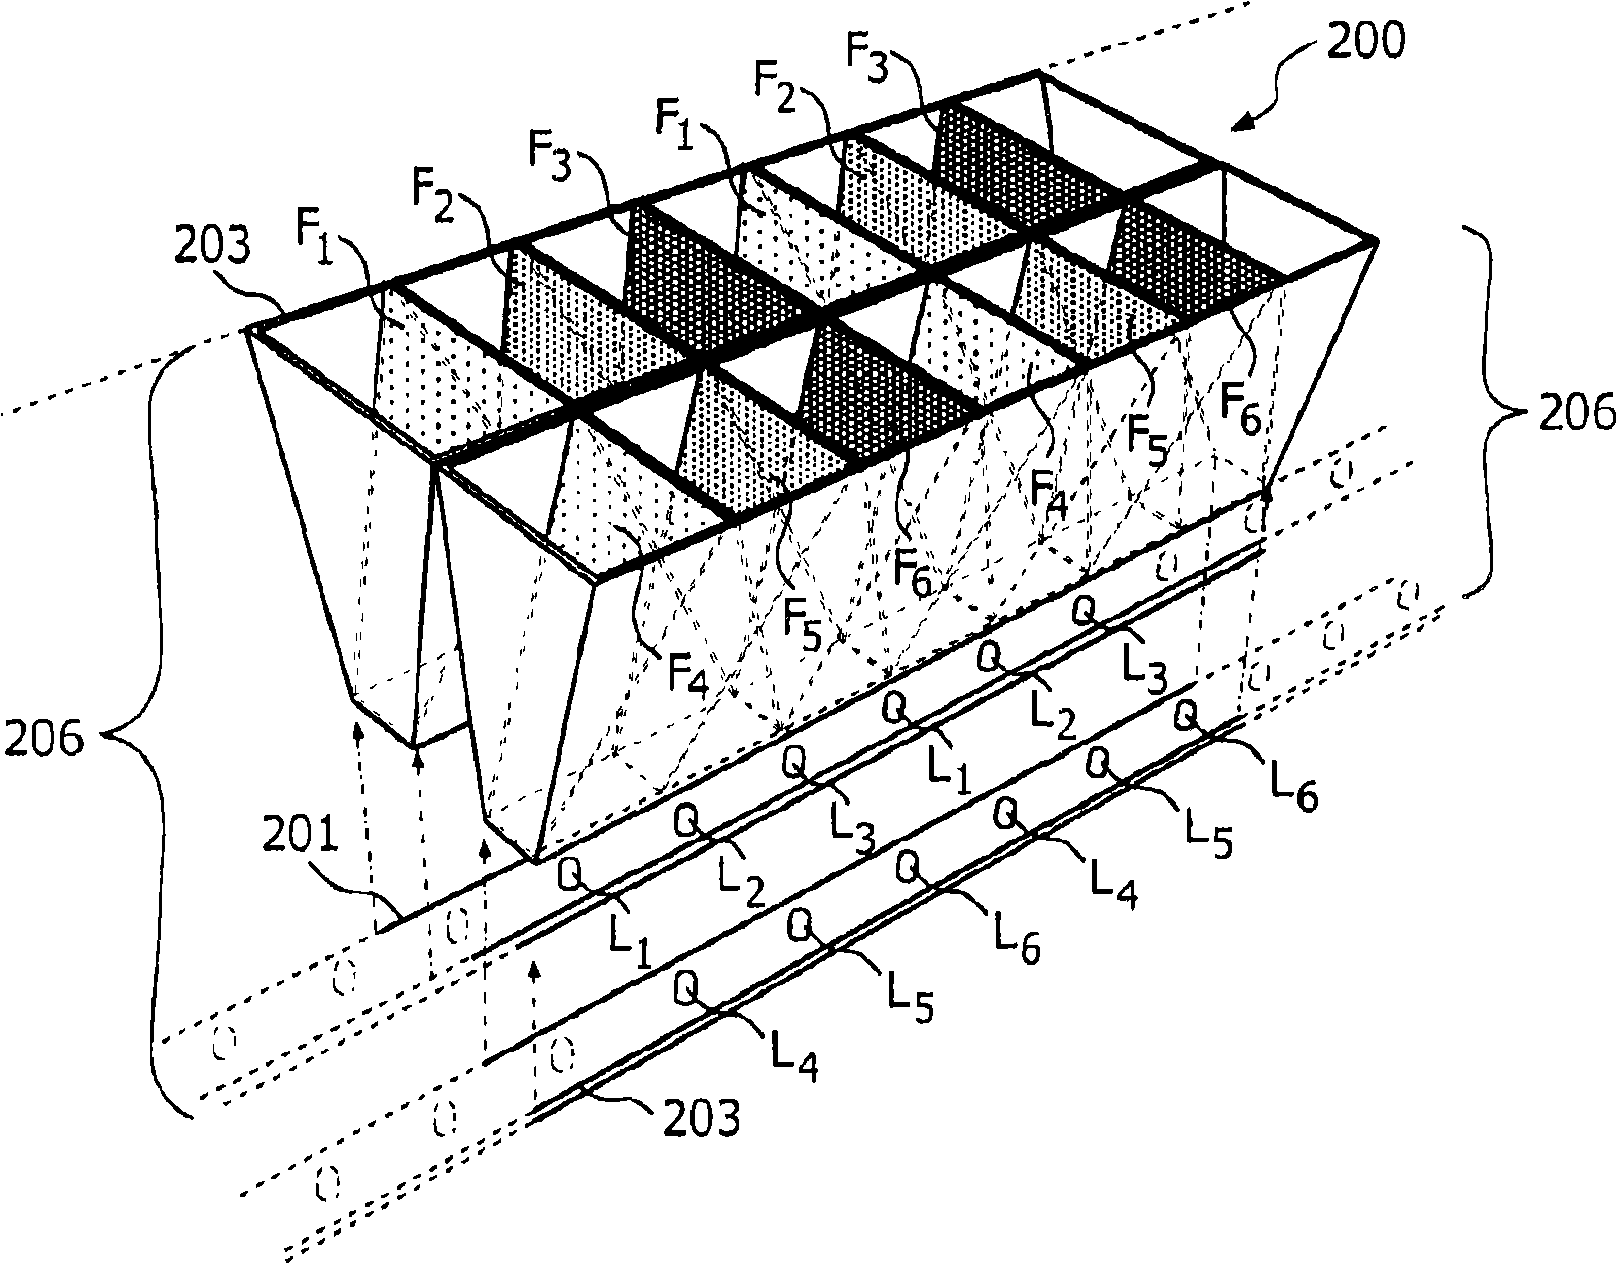 Illumination system with multiple sets of light sources